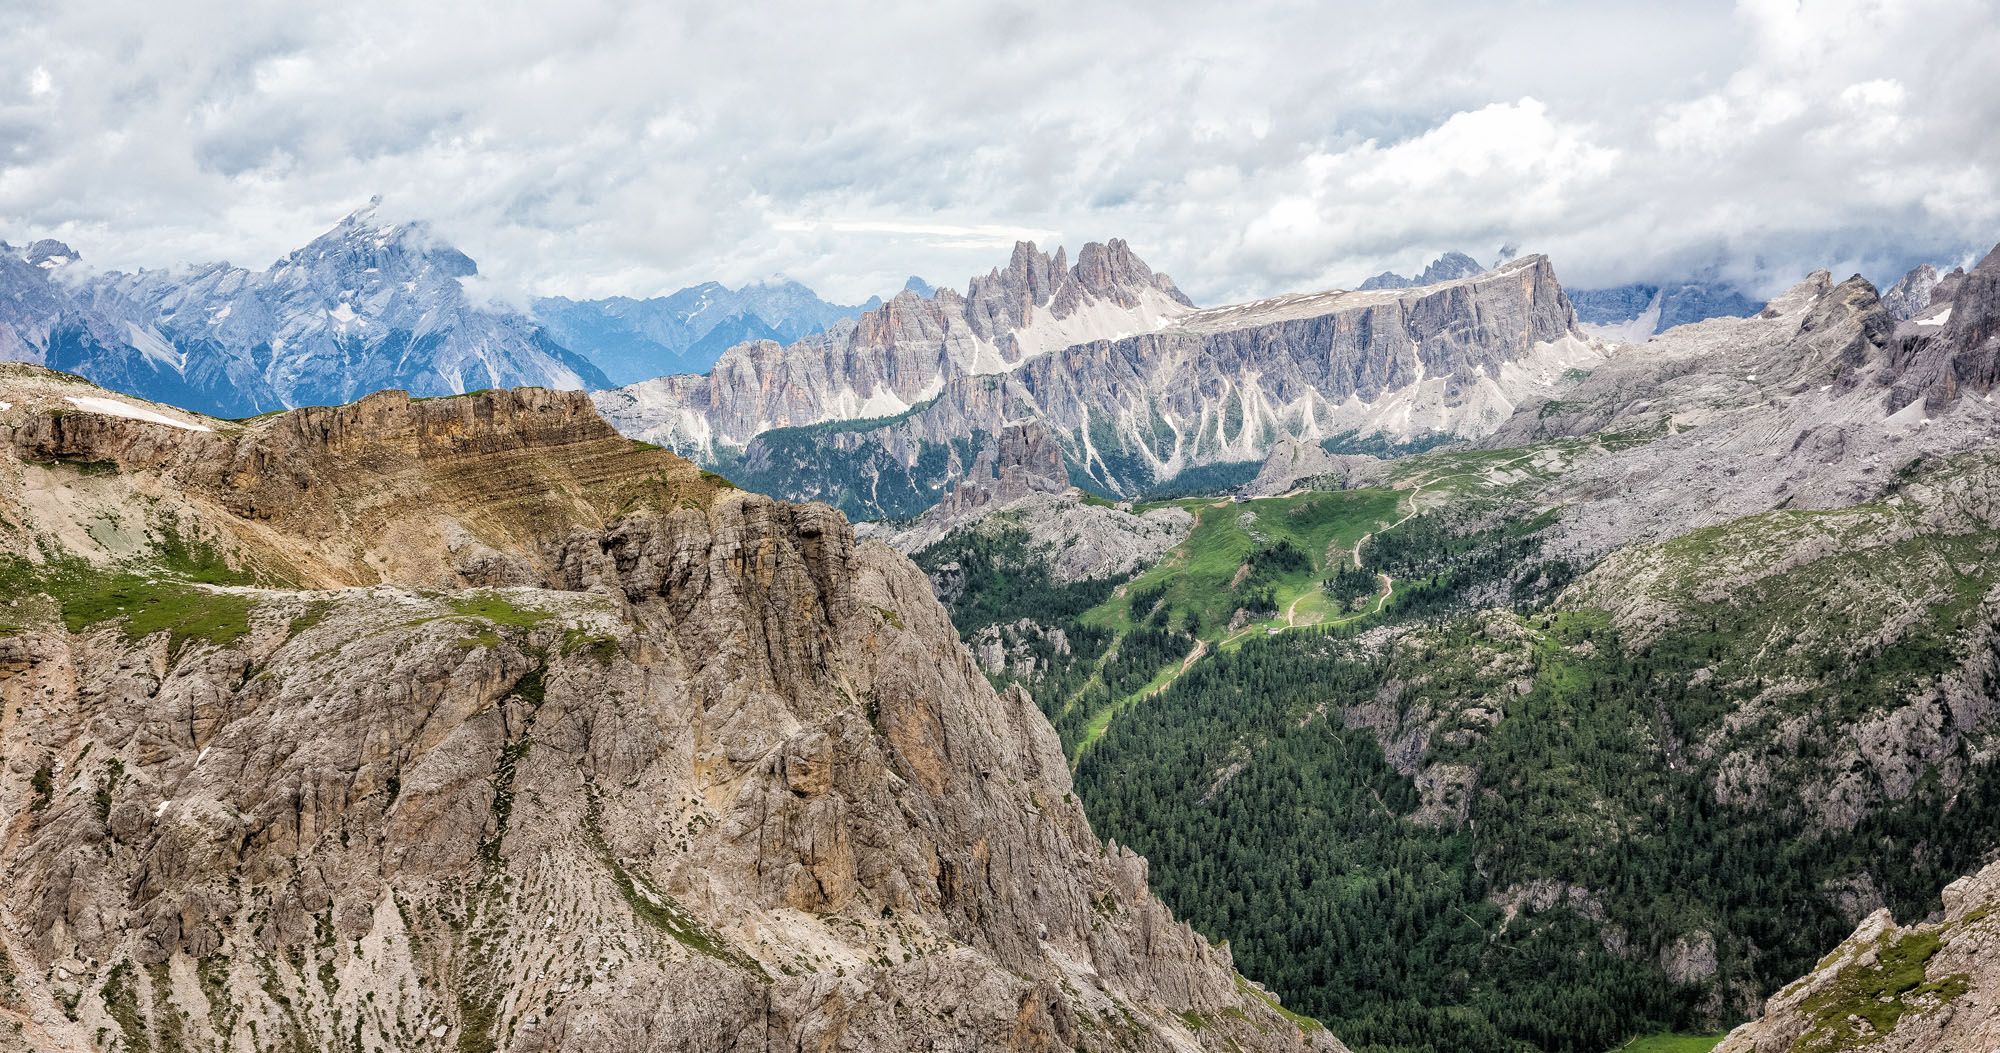 Featured image for “Lagazuoi to Passo Falzarego: Hiking the Frontline Trail”